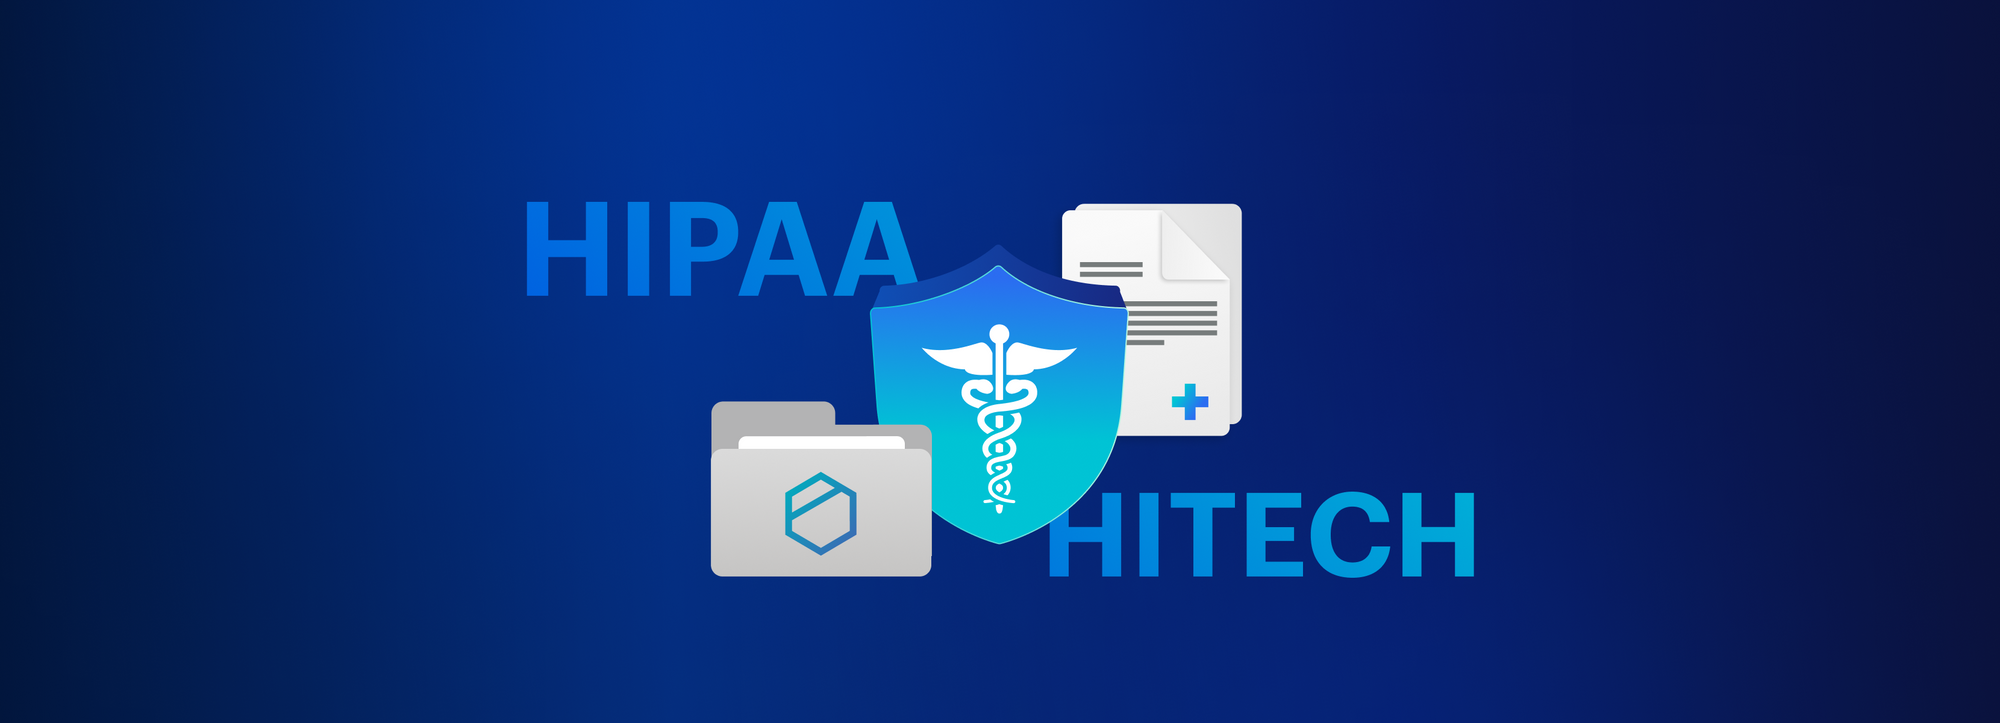 HIPAA vs. HITECH: understanding the difference and how to comply